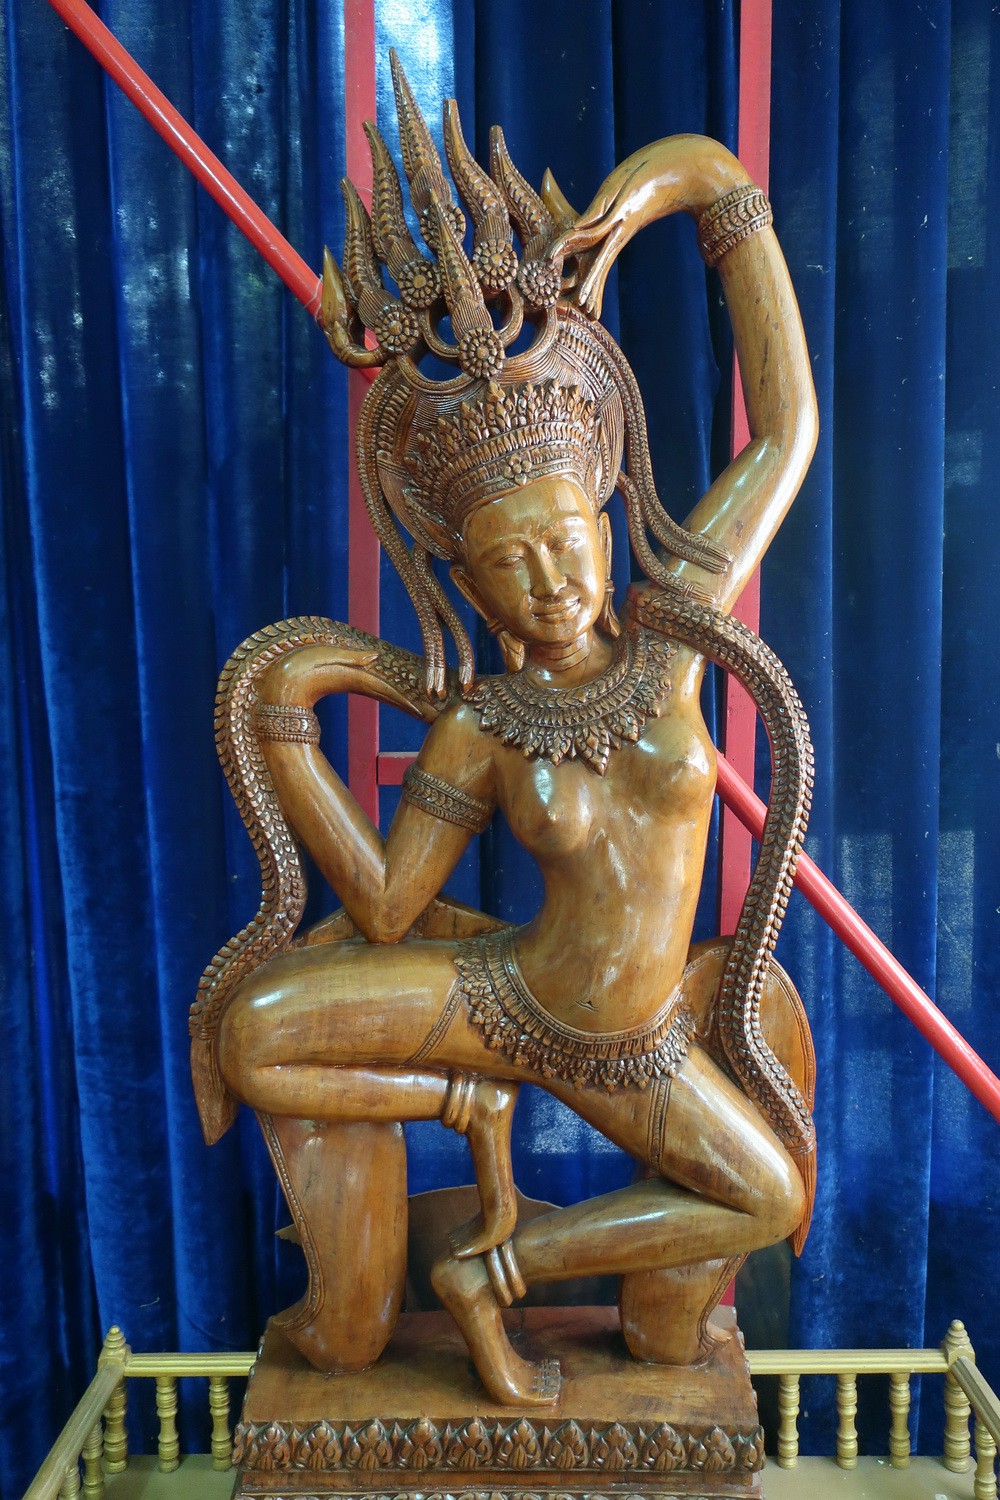 Apsara in the premises close to the Royal Palace